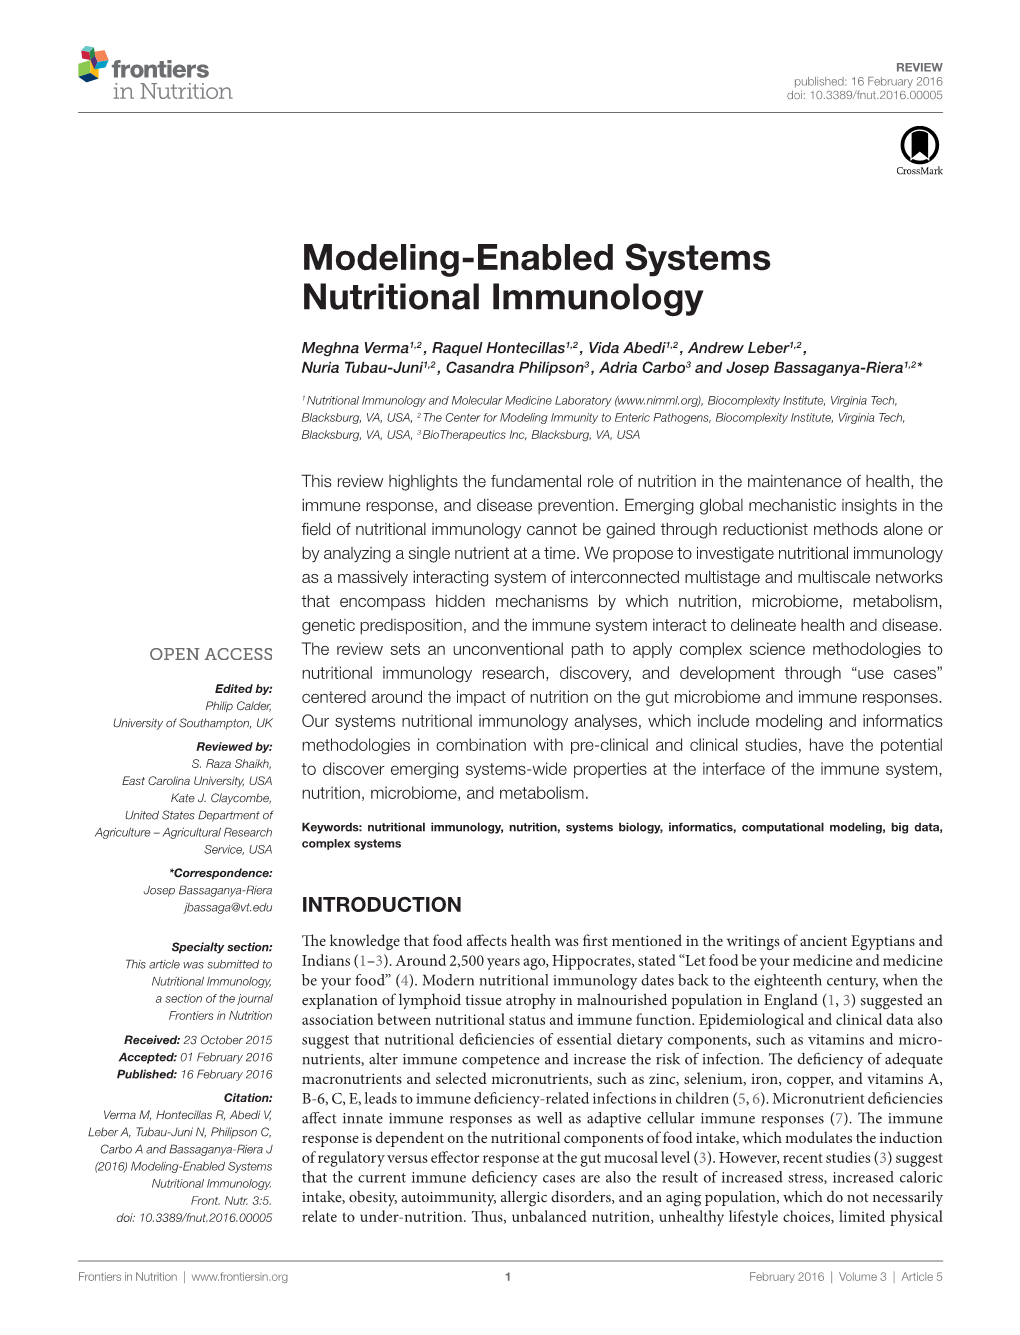 Modeling-Enabled Systems Nutritional Immunology